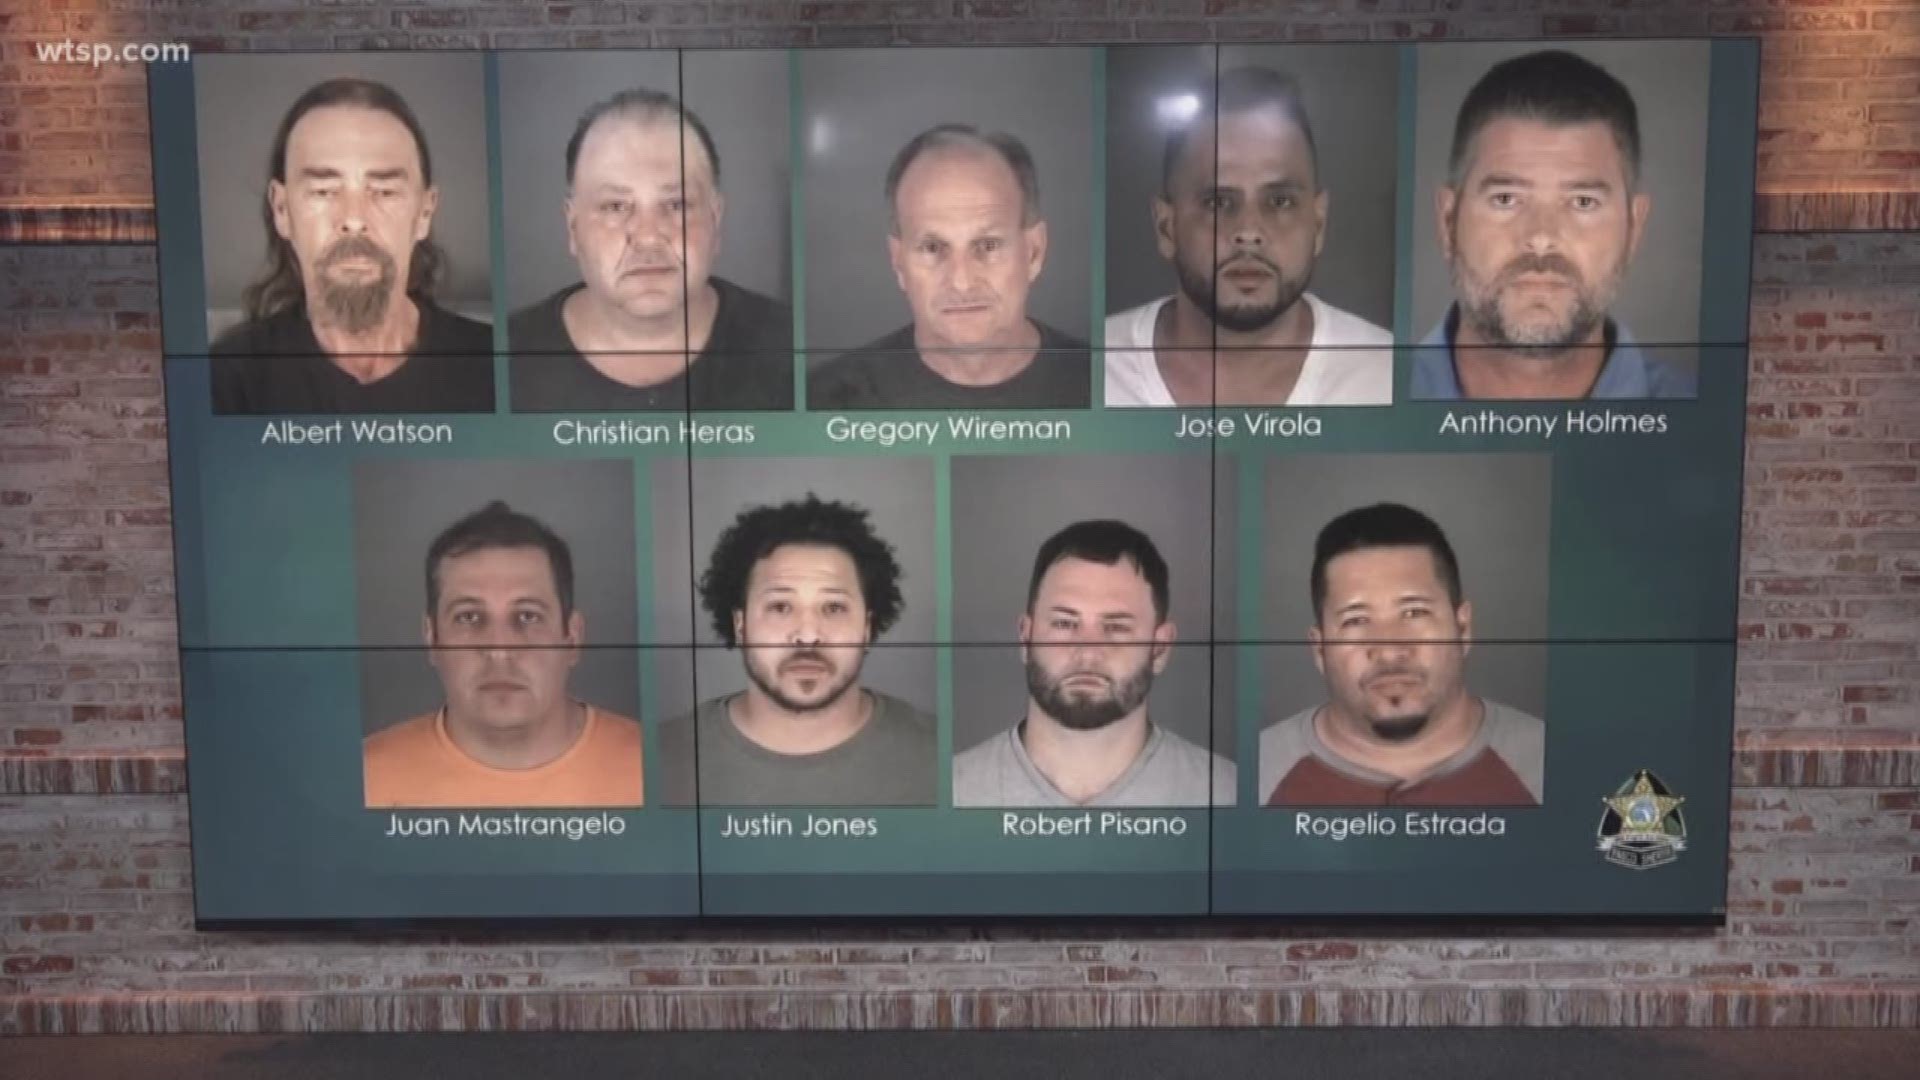 More than a dozen people have been arrested and charged with unlicensed contracting in Pasco County.
The suspects advertised across social media saying they could do the work on people’s homes even though they were not anywhere near qualified to.